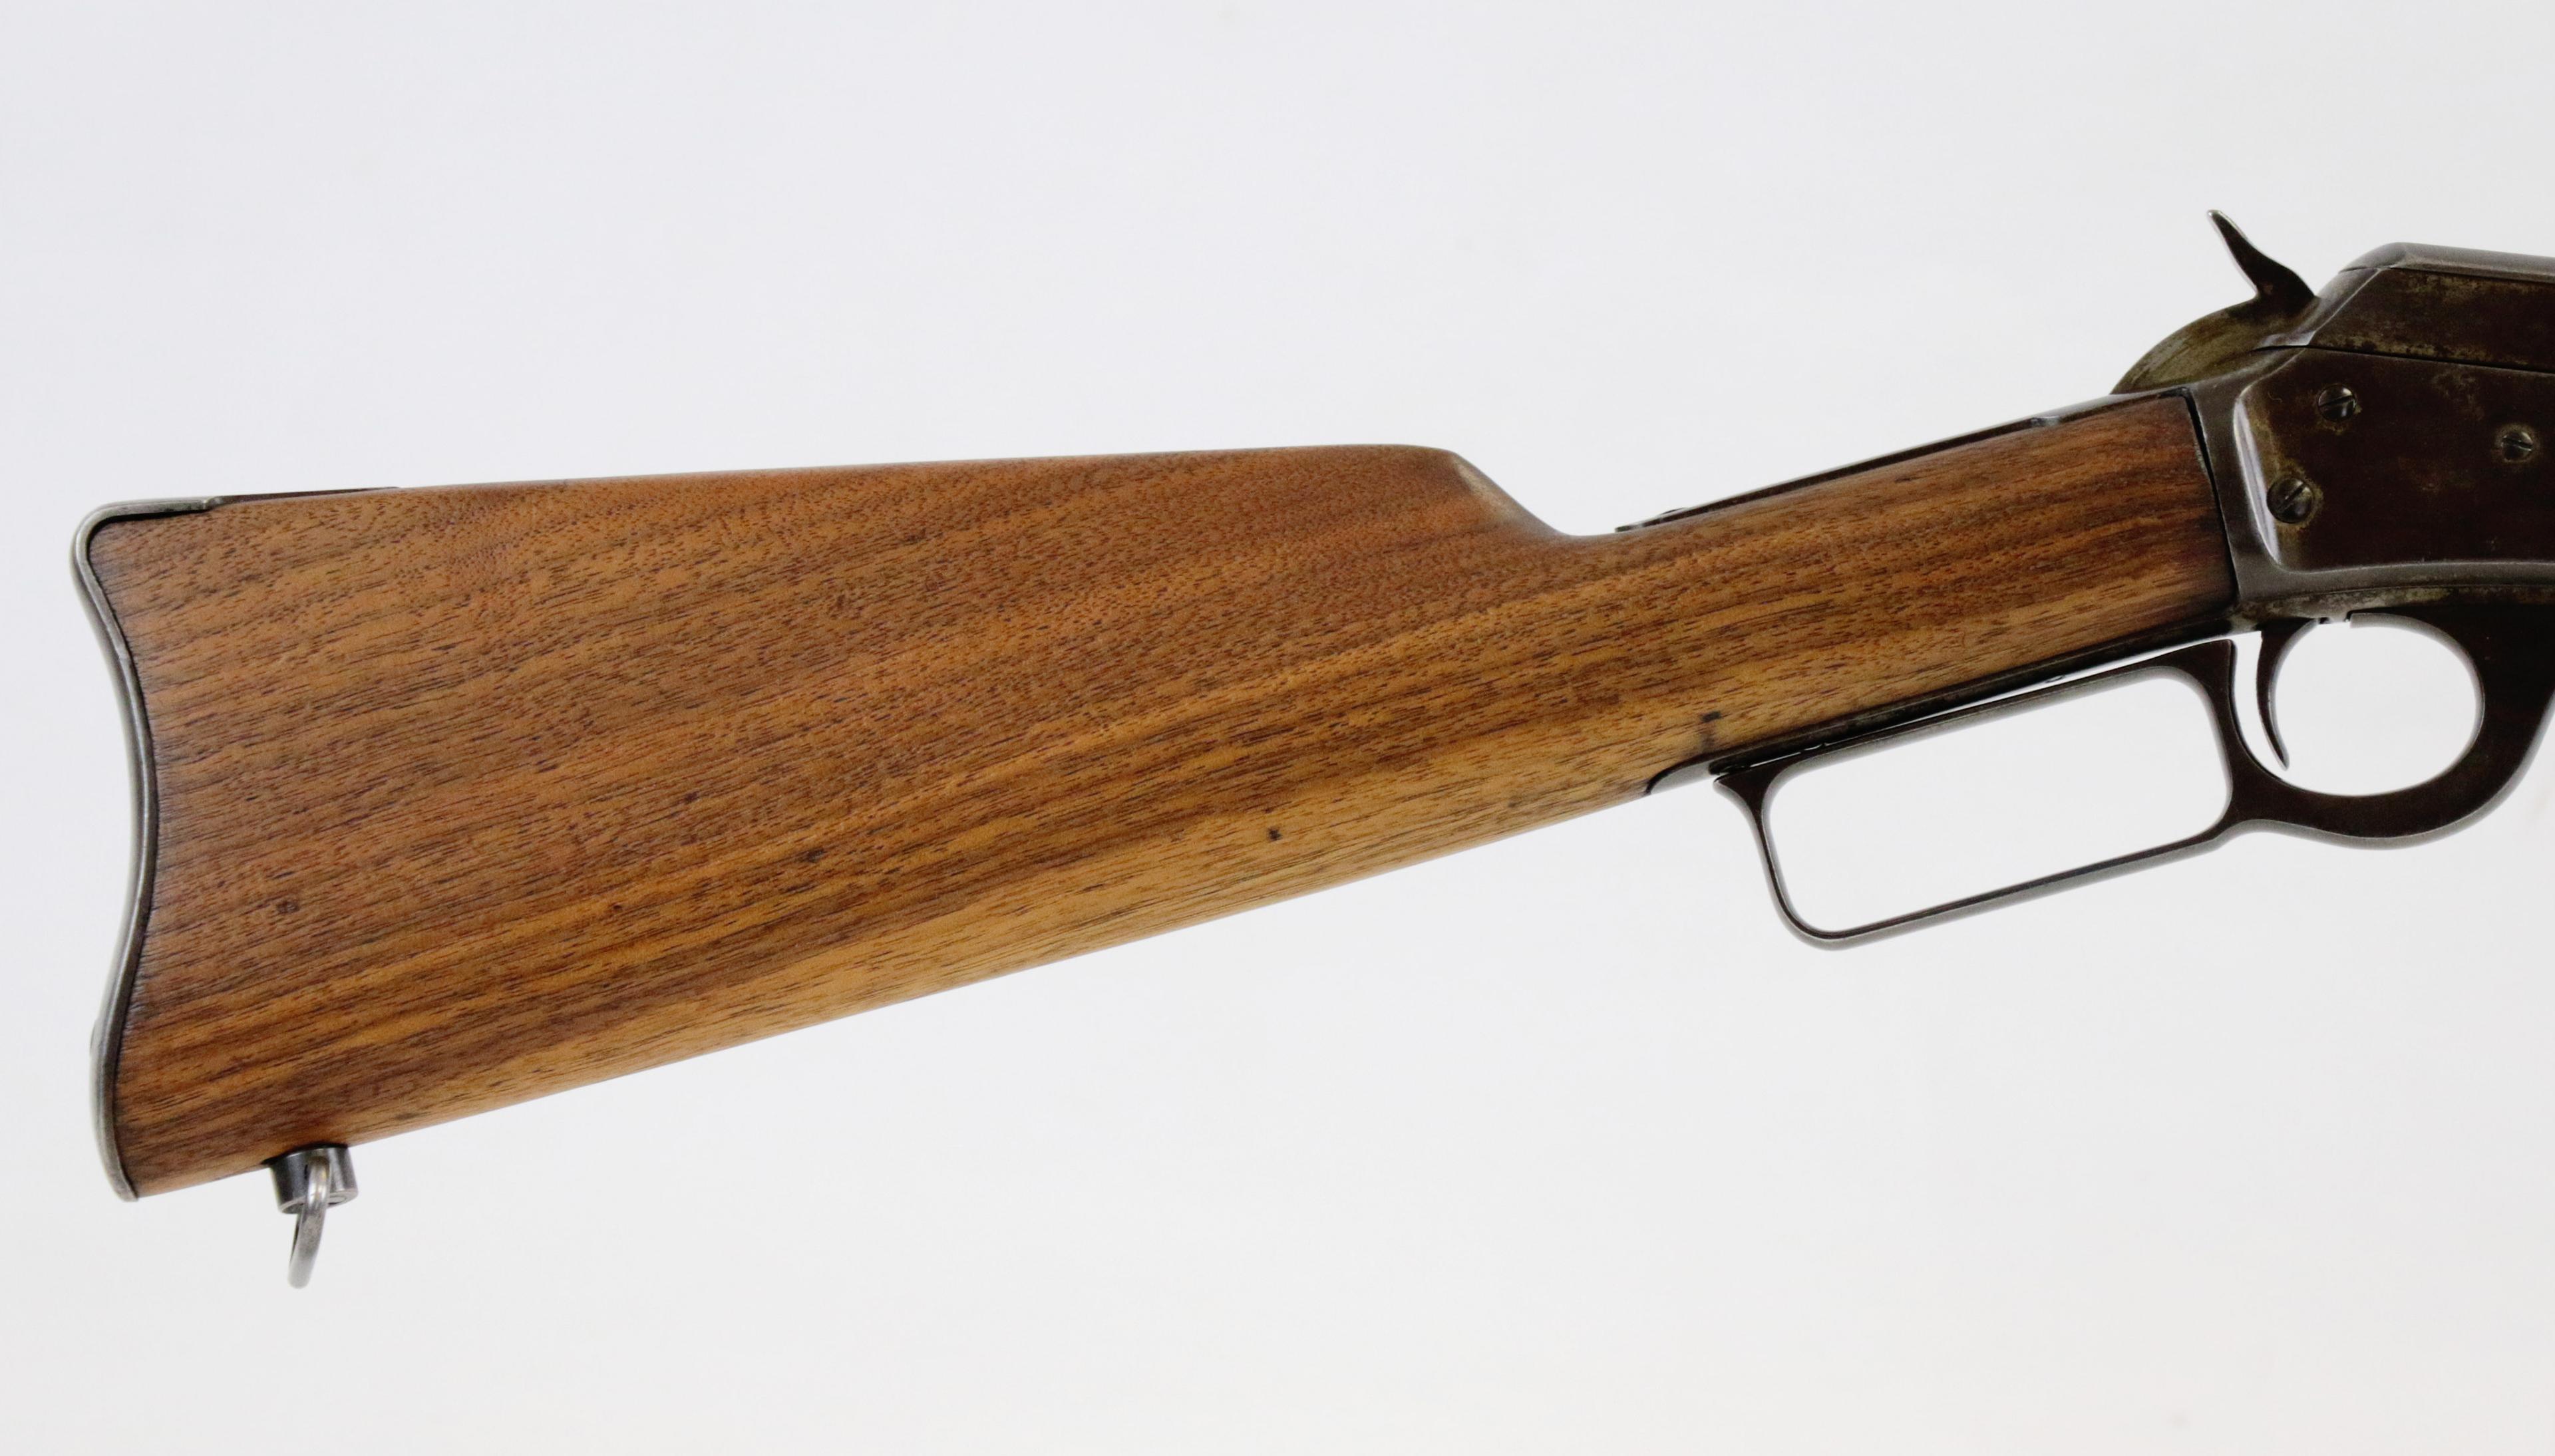 Marlin mod 1893 .30-30 Lever Action Rifle